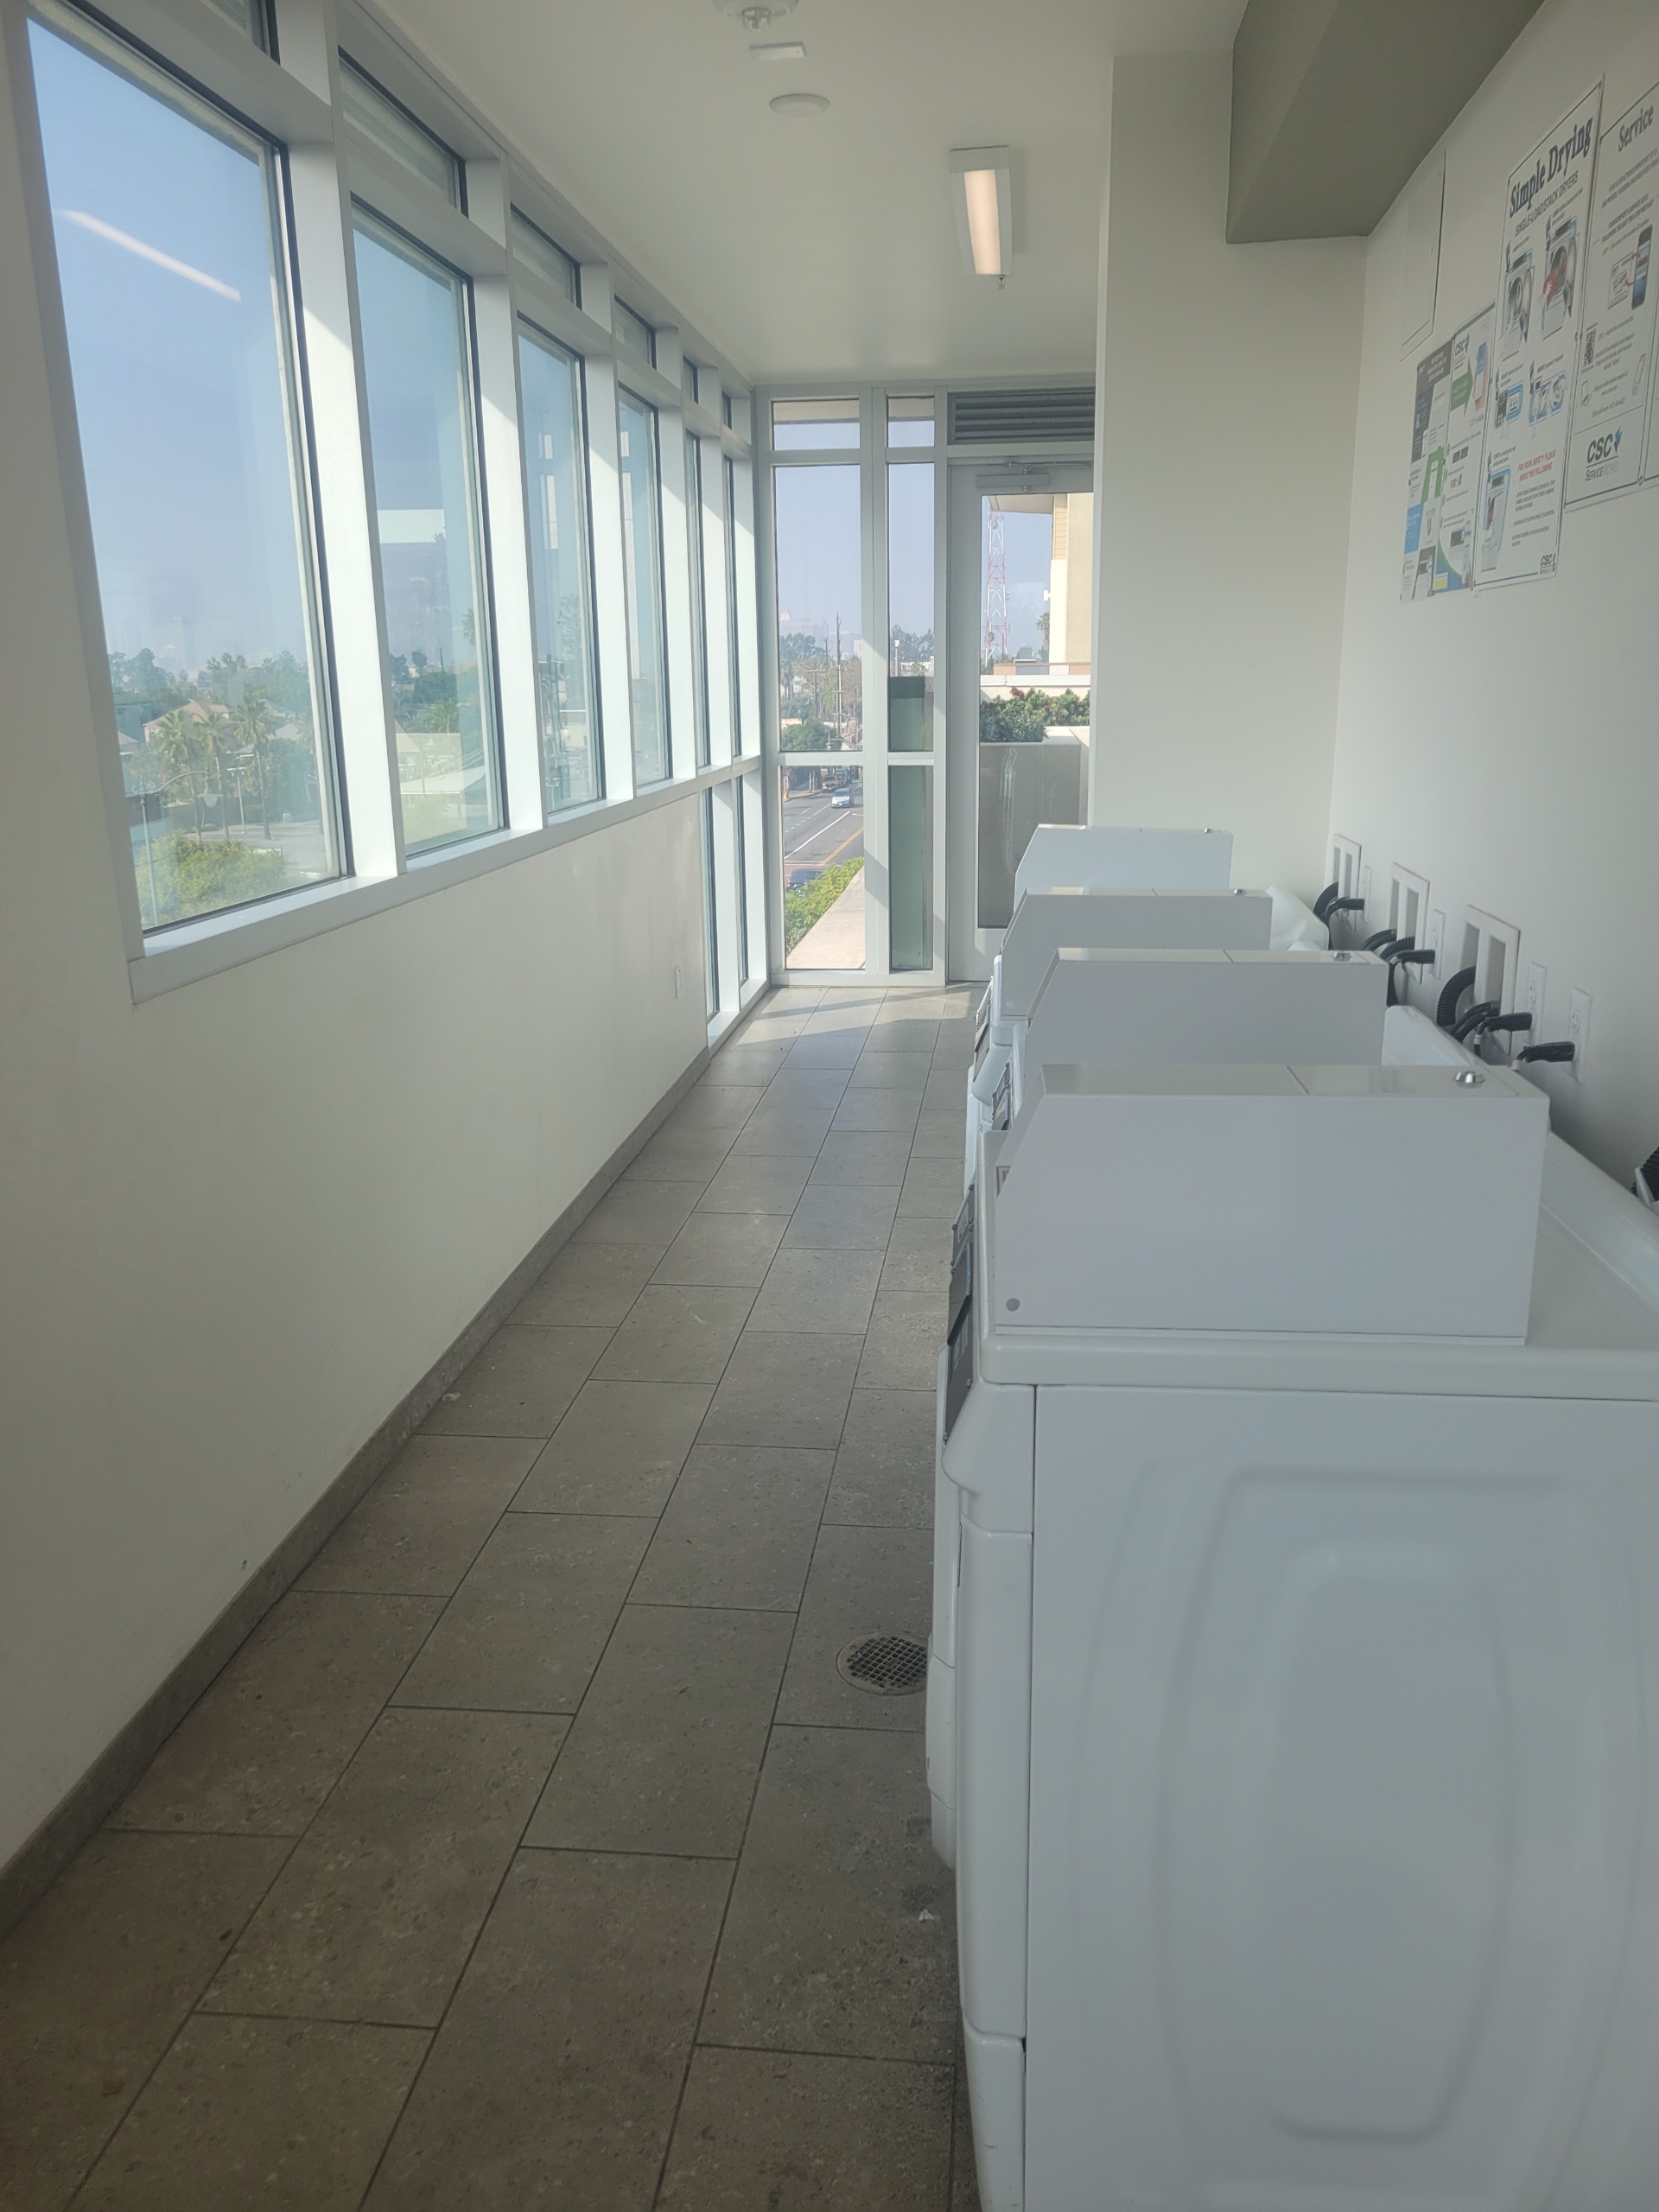 CLII laundry room Machines line the right wall. Windows line the left. At the end there is a big window.